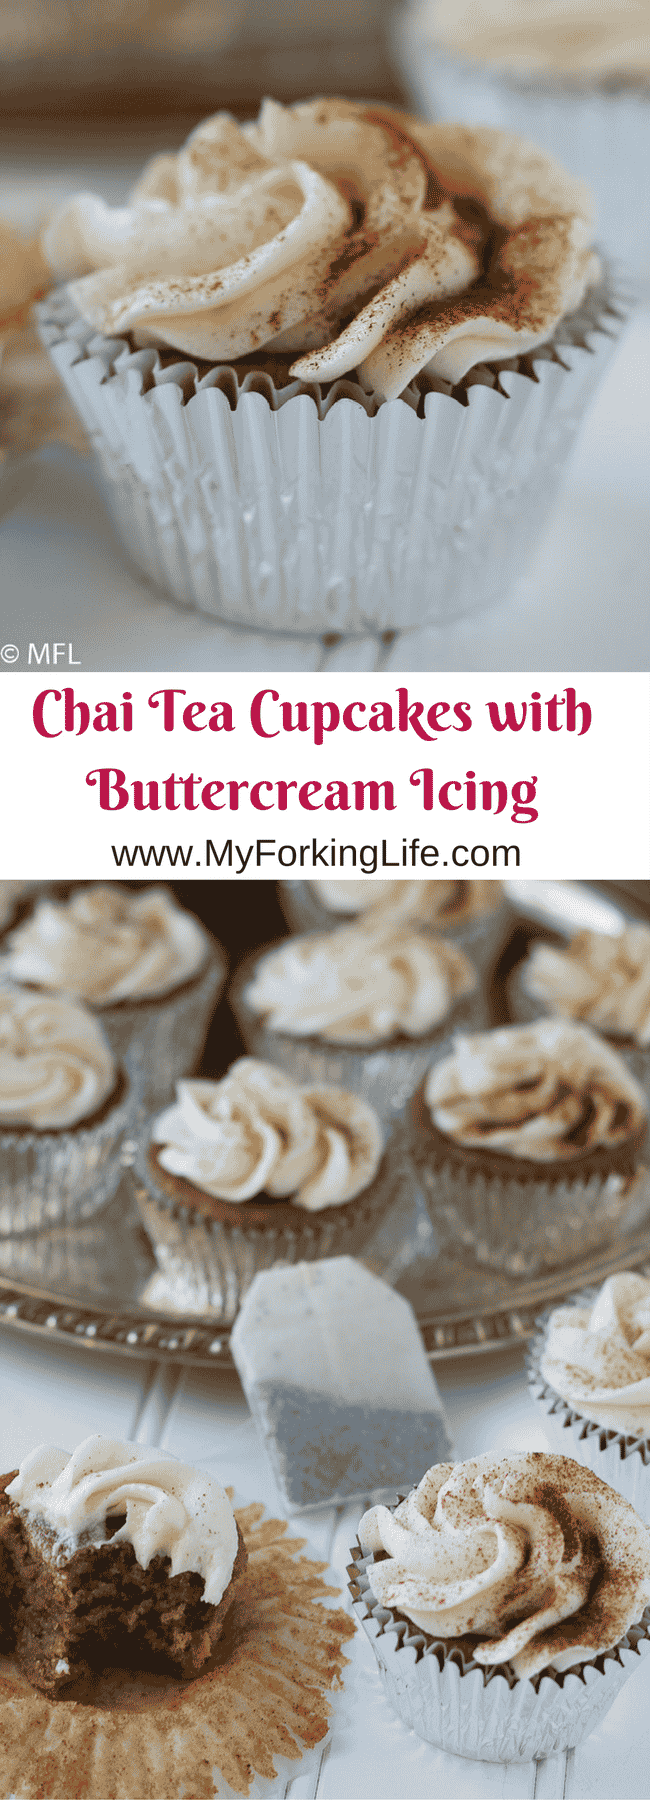 Chai Tea Cupcakes with Buttercream Icing - My Forking Life